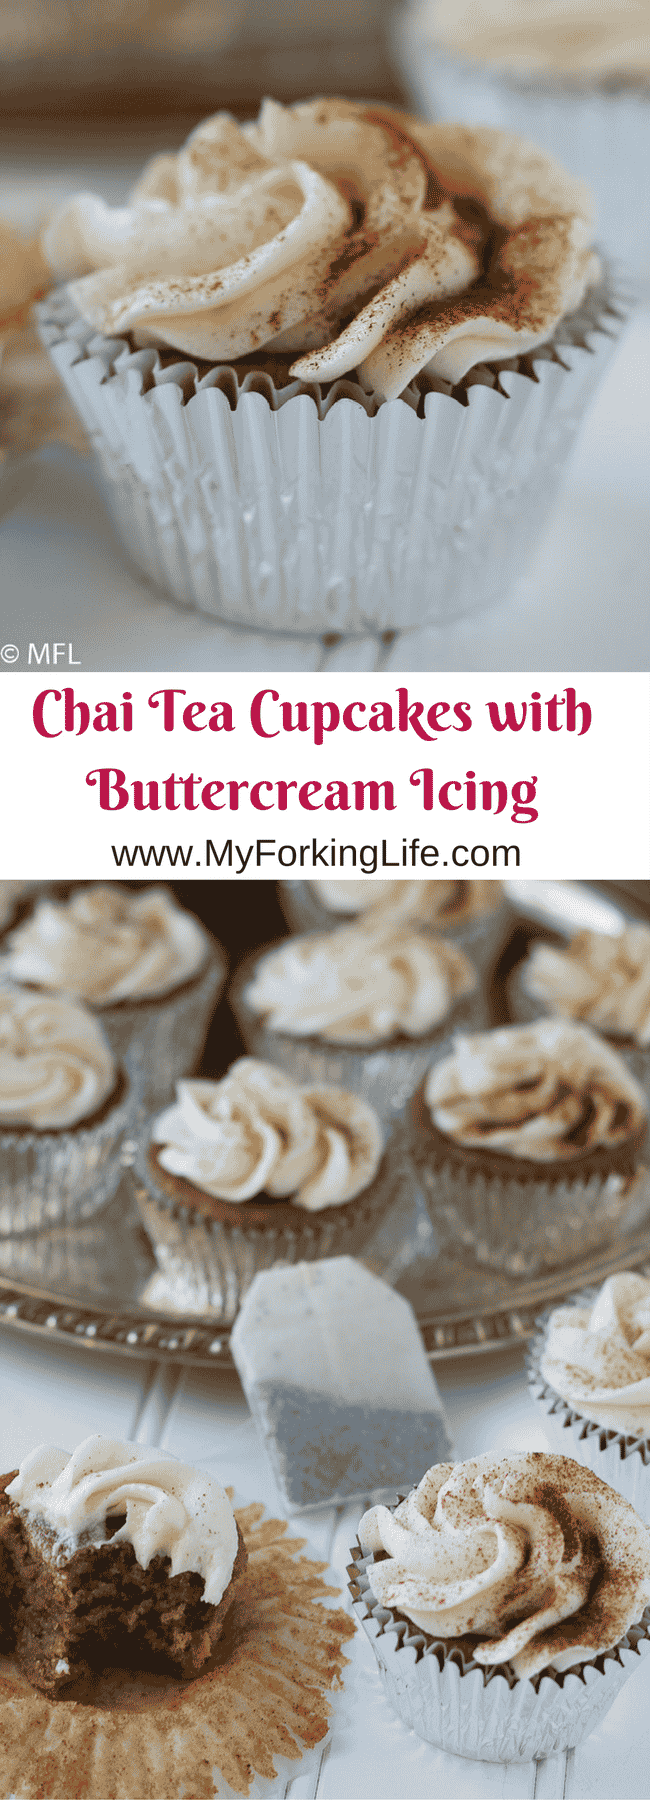 Chai Tea Cupcakes with Buttercream Icing - My Forking Life